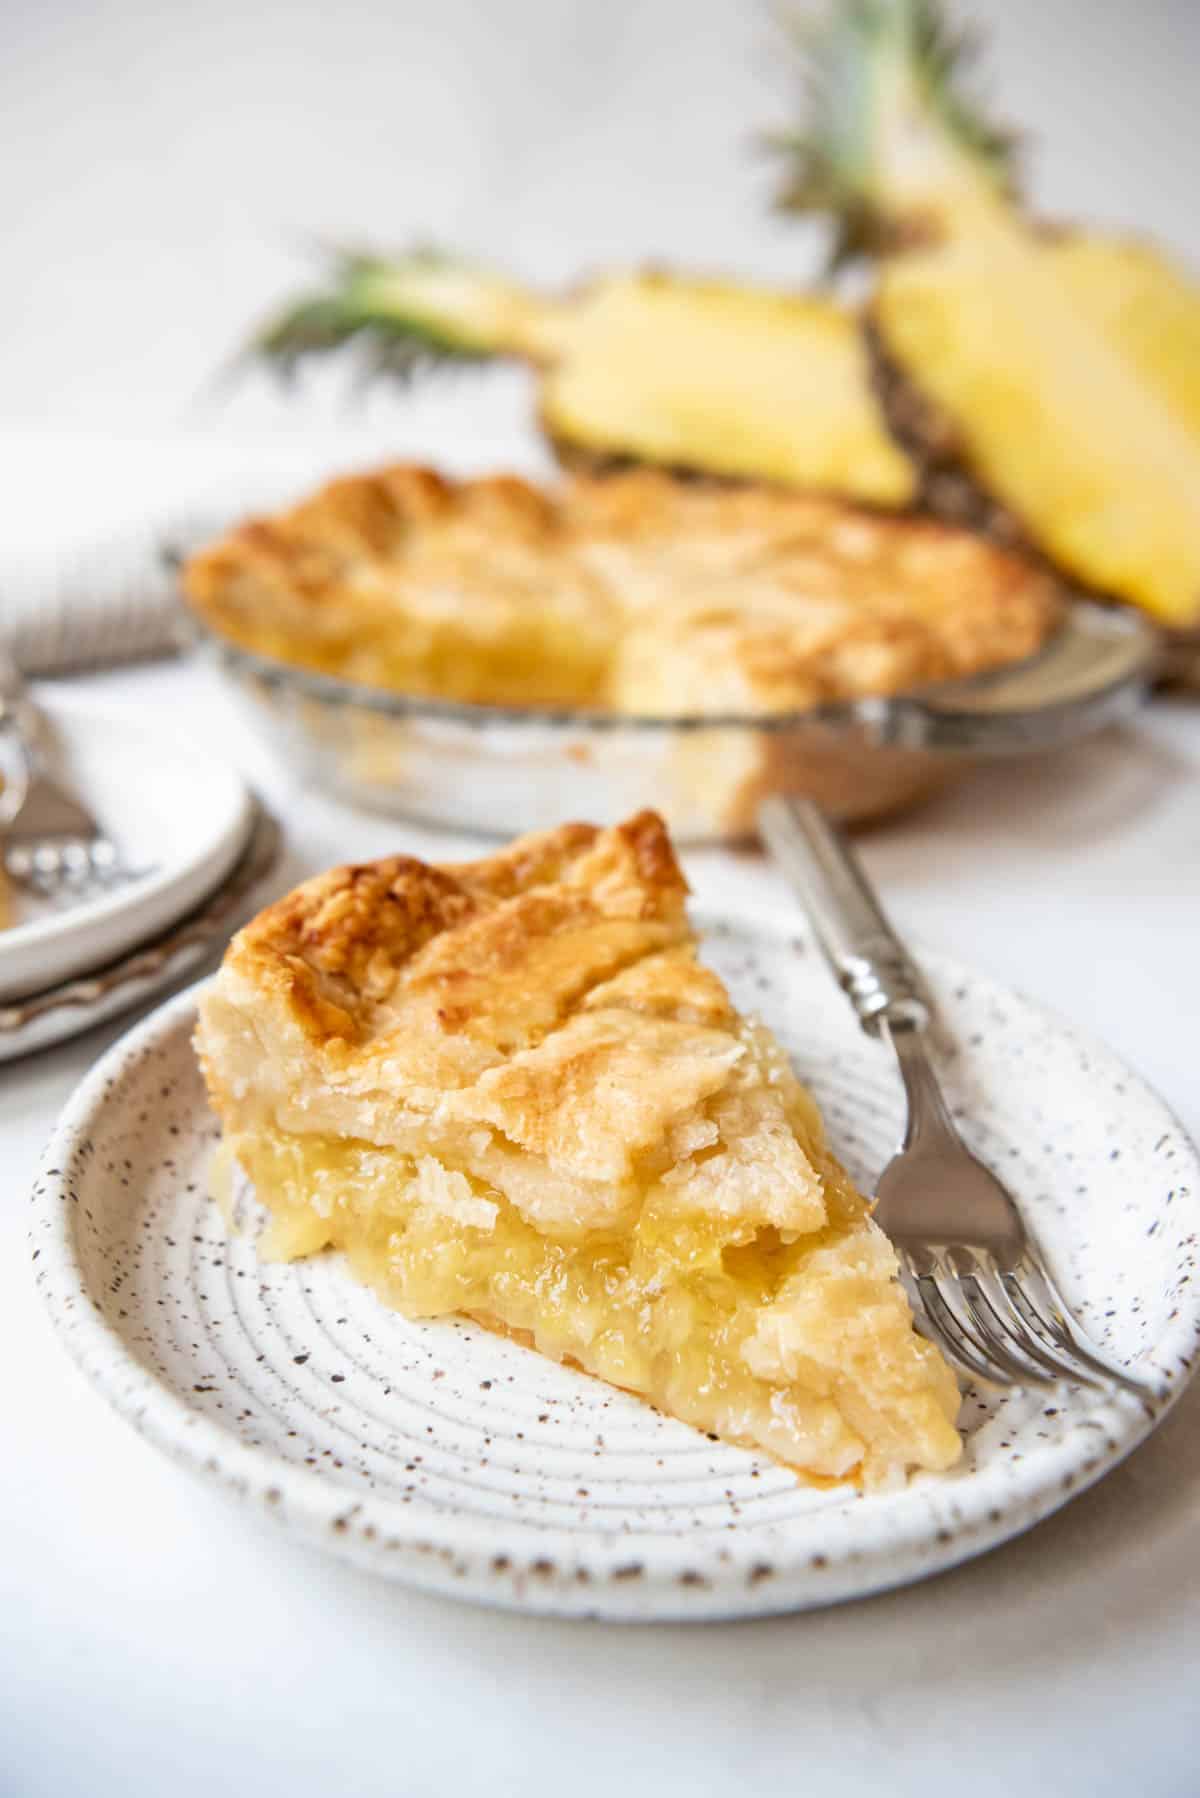 A piece of old-fashioned pineapple pie on a plate.